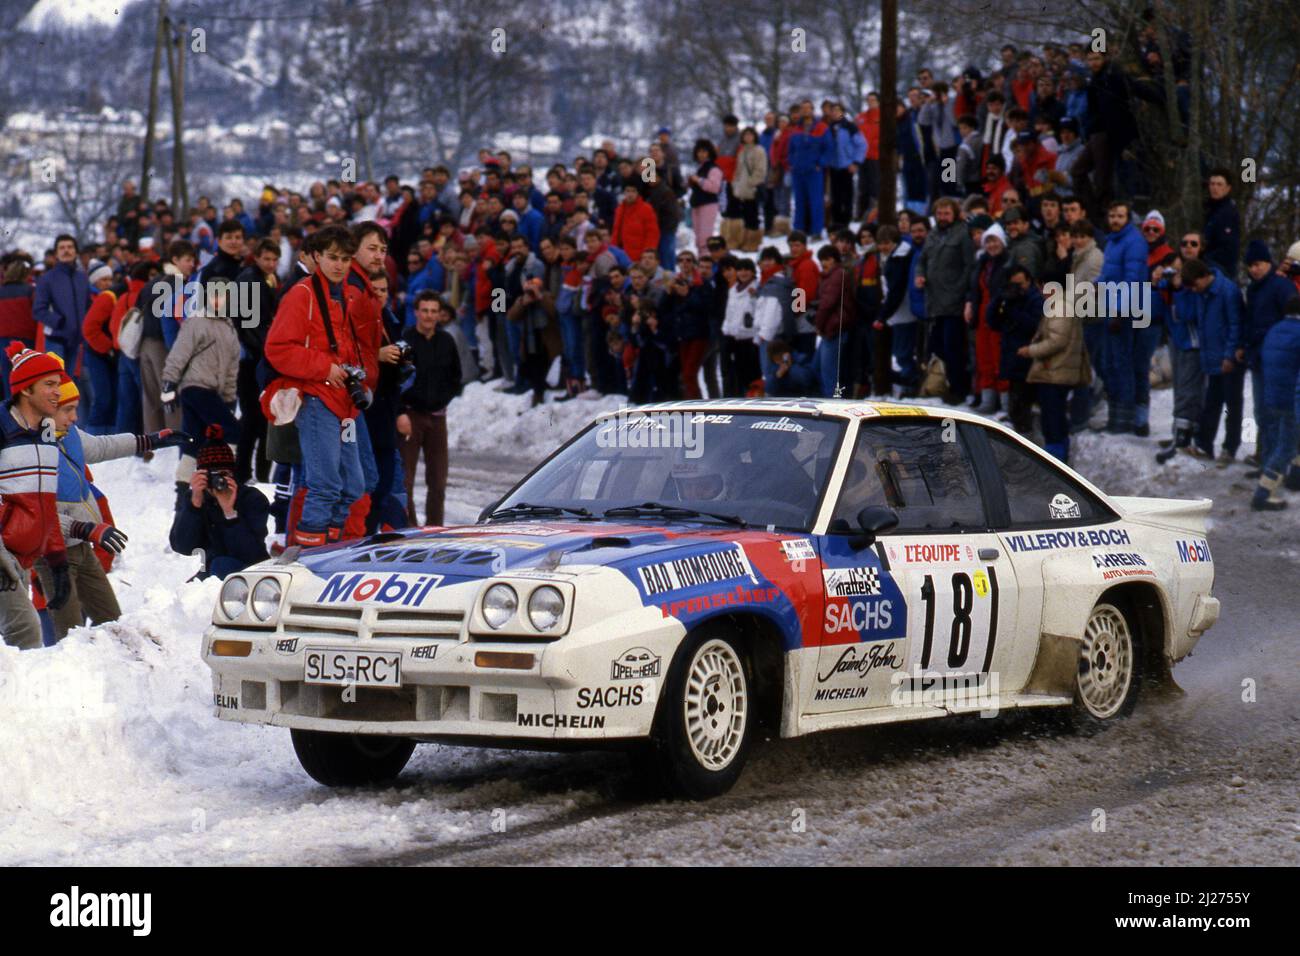 Manfred Hero (GER) Ludwig Grot (GER) Opel Manta 400 GRB Irmscher Banque D'Images